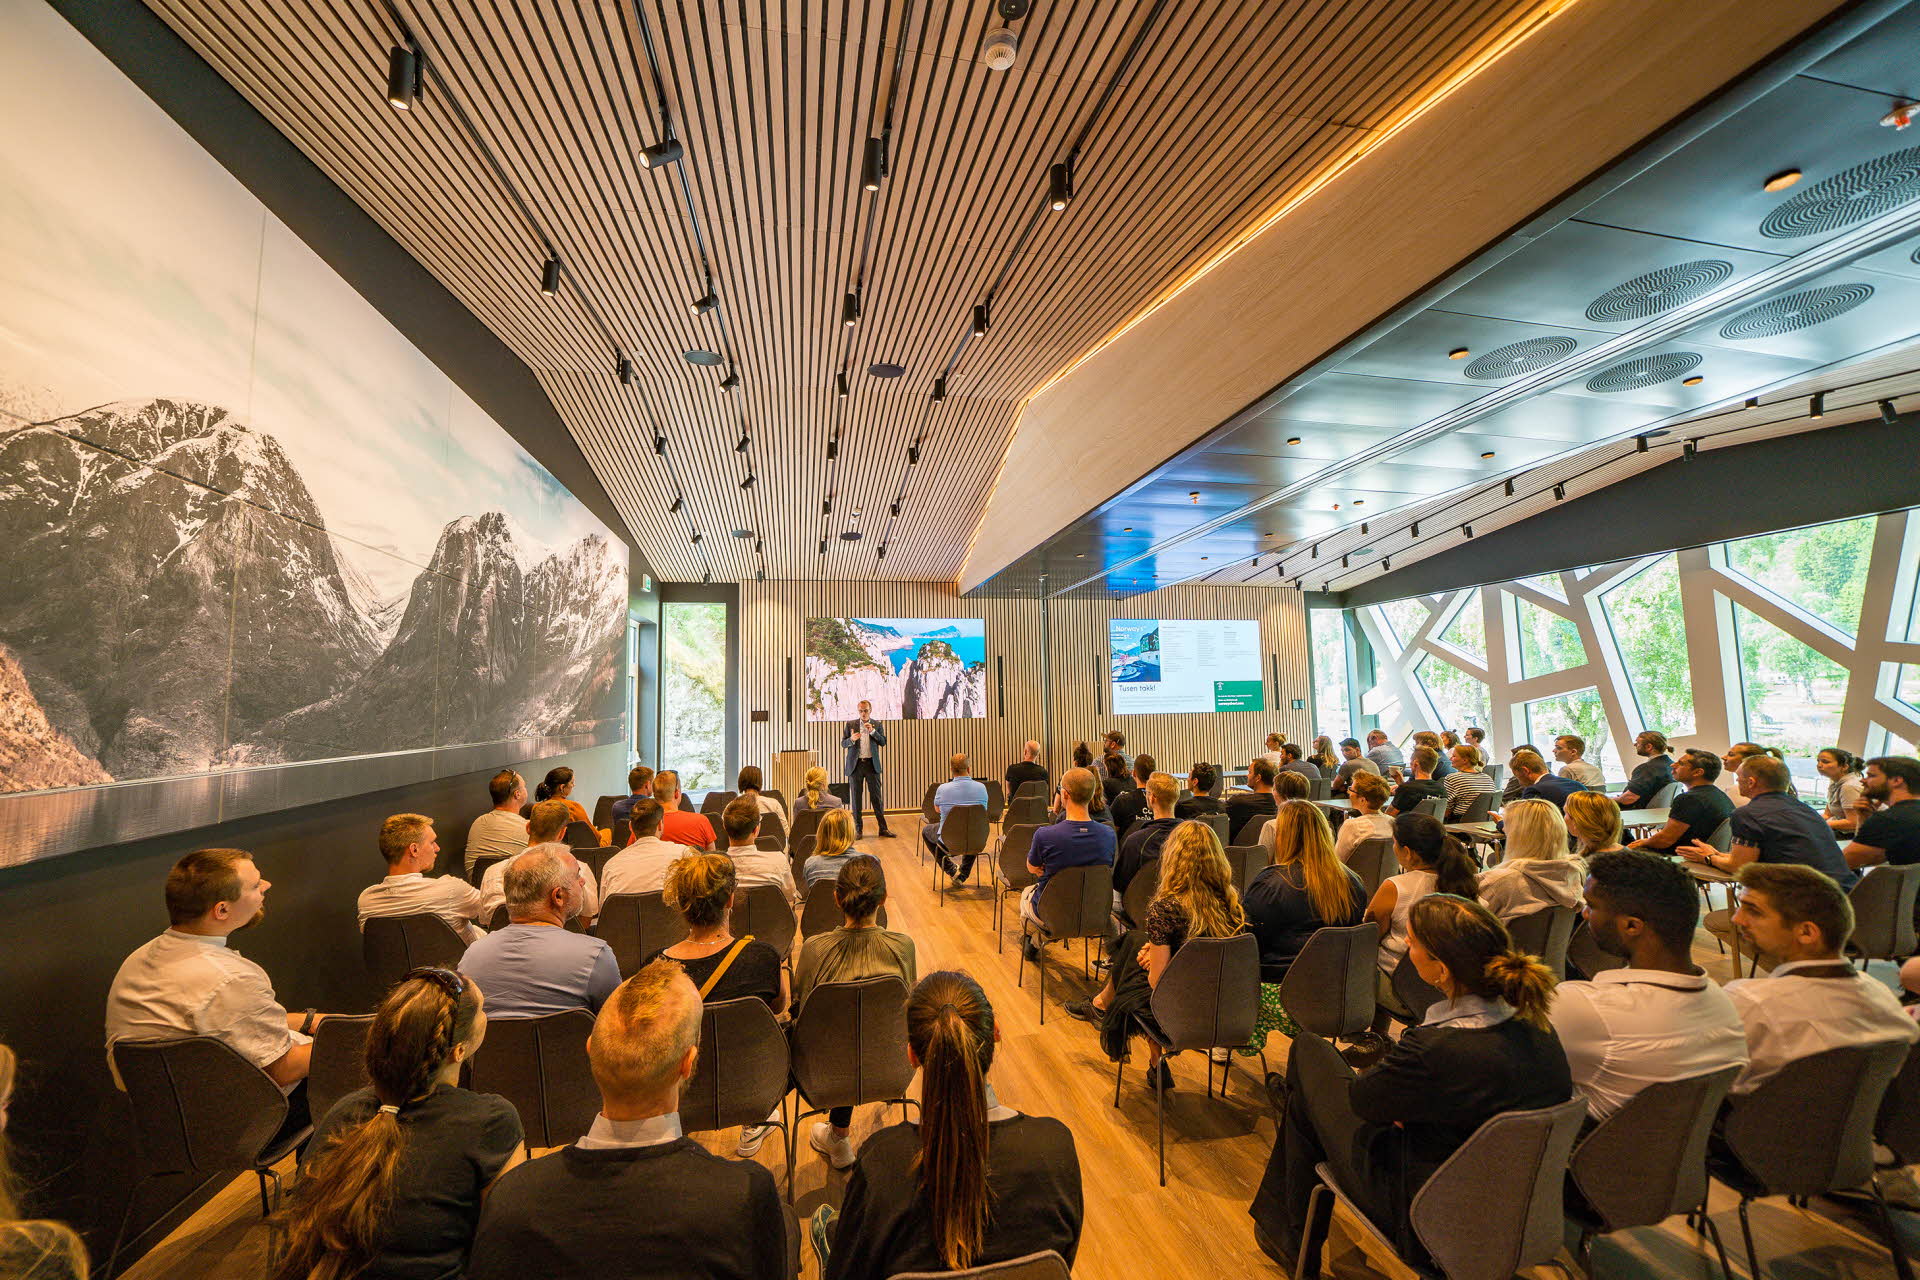 People sitting in a large conference room with a large picture on one wall, windows on the other and a screen in front.